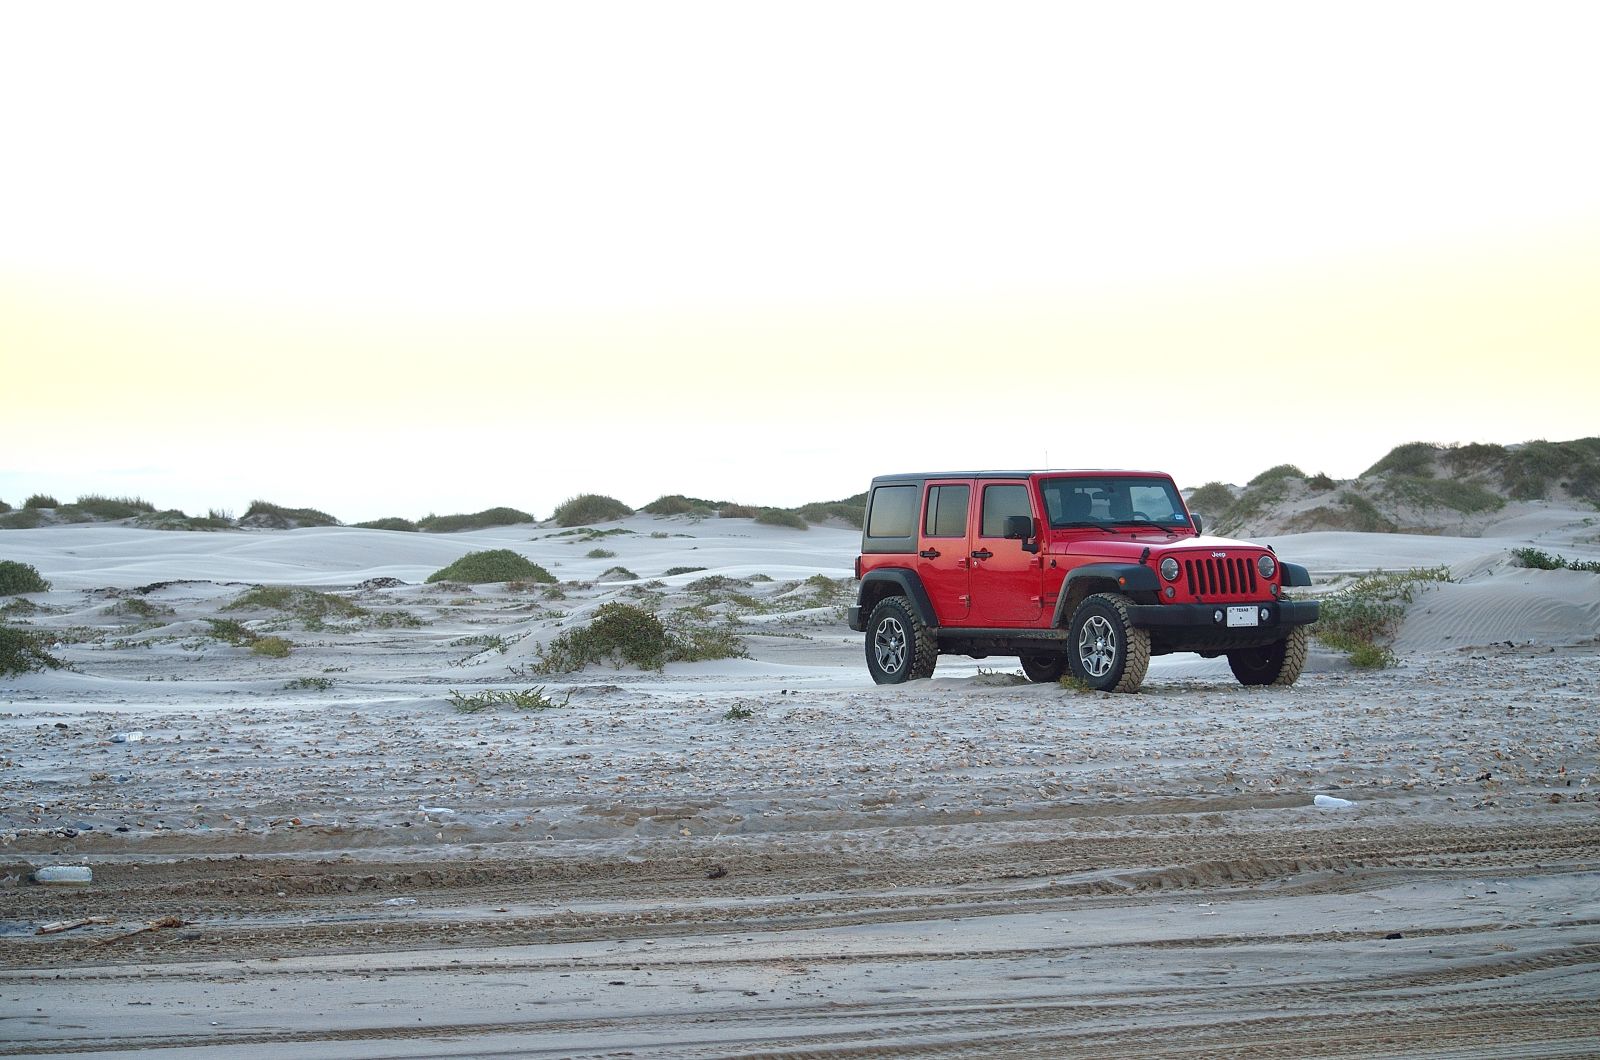 South Padre Island - No I’m not in the dunes!